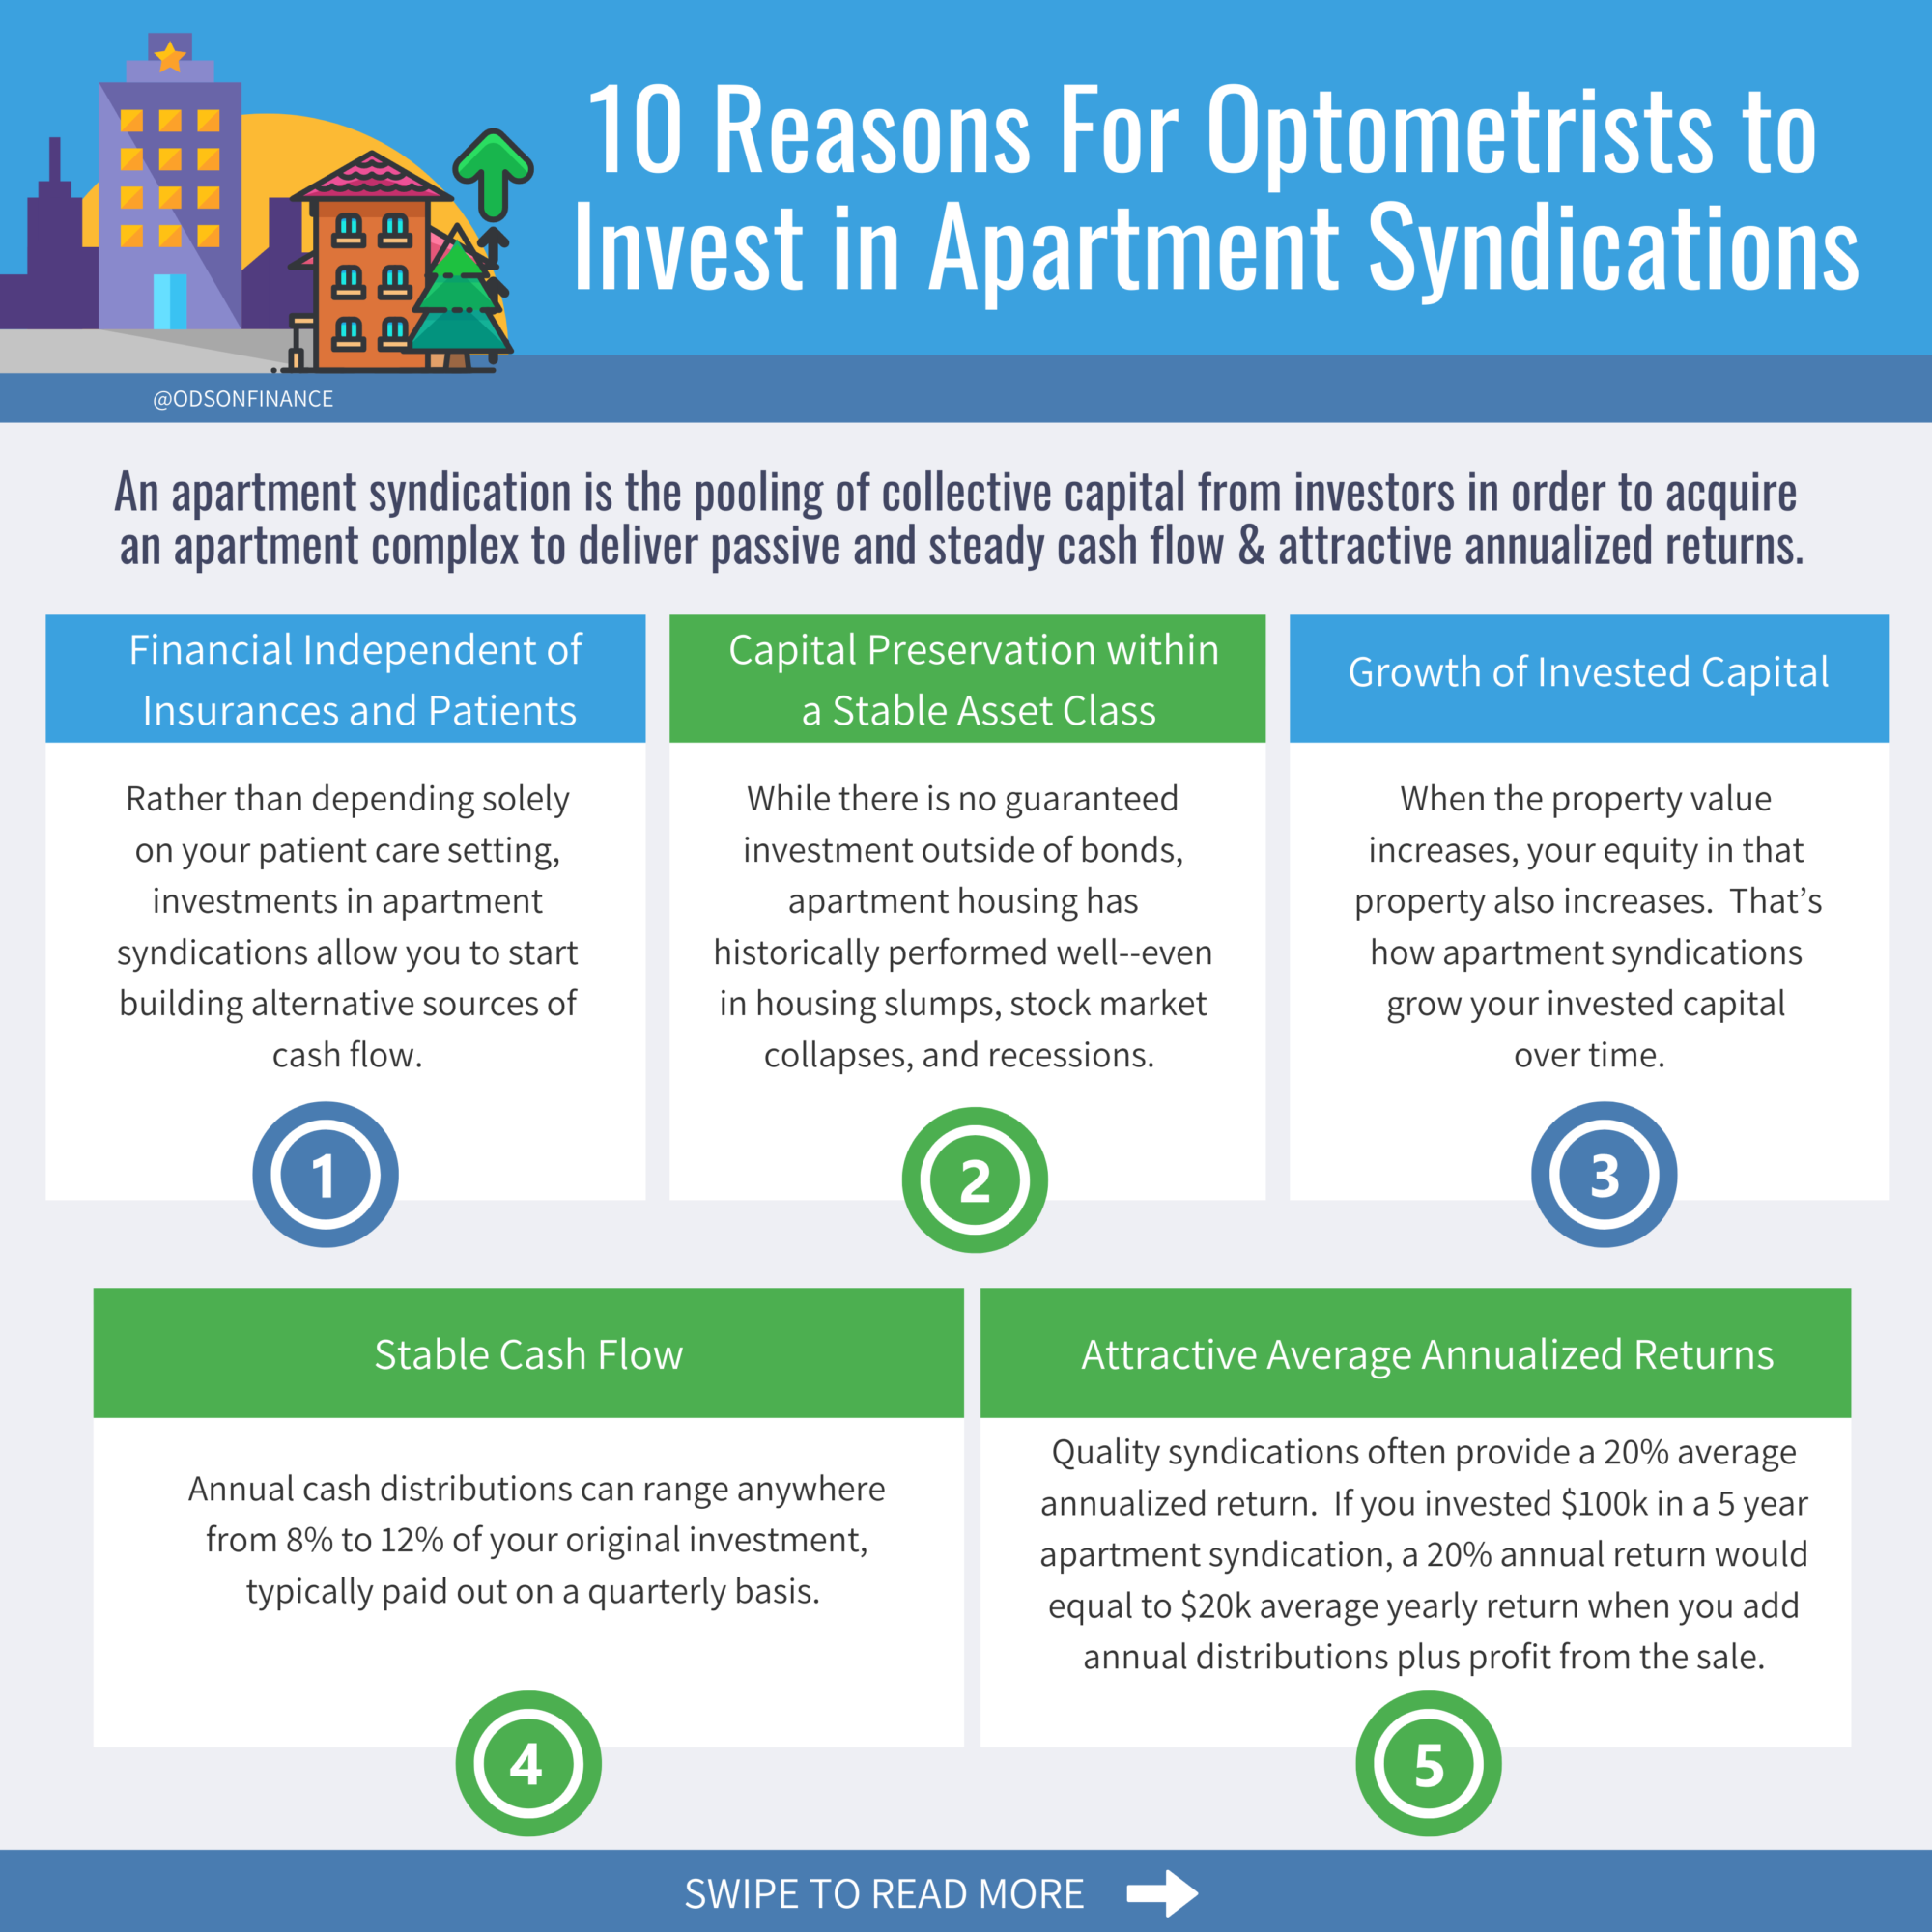 10 Reasons For Optometrists to Invest in Apartment Syndications & 2 Reasons to Not Invest in Apartment Syndications 2